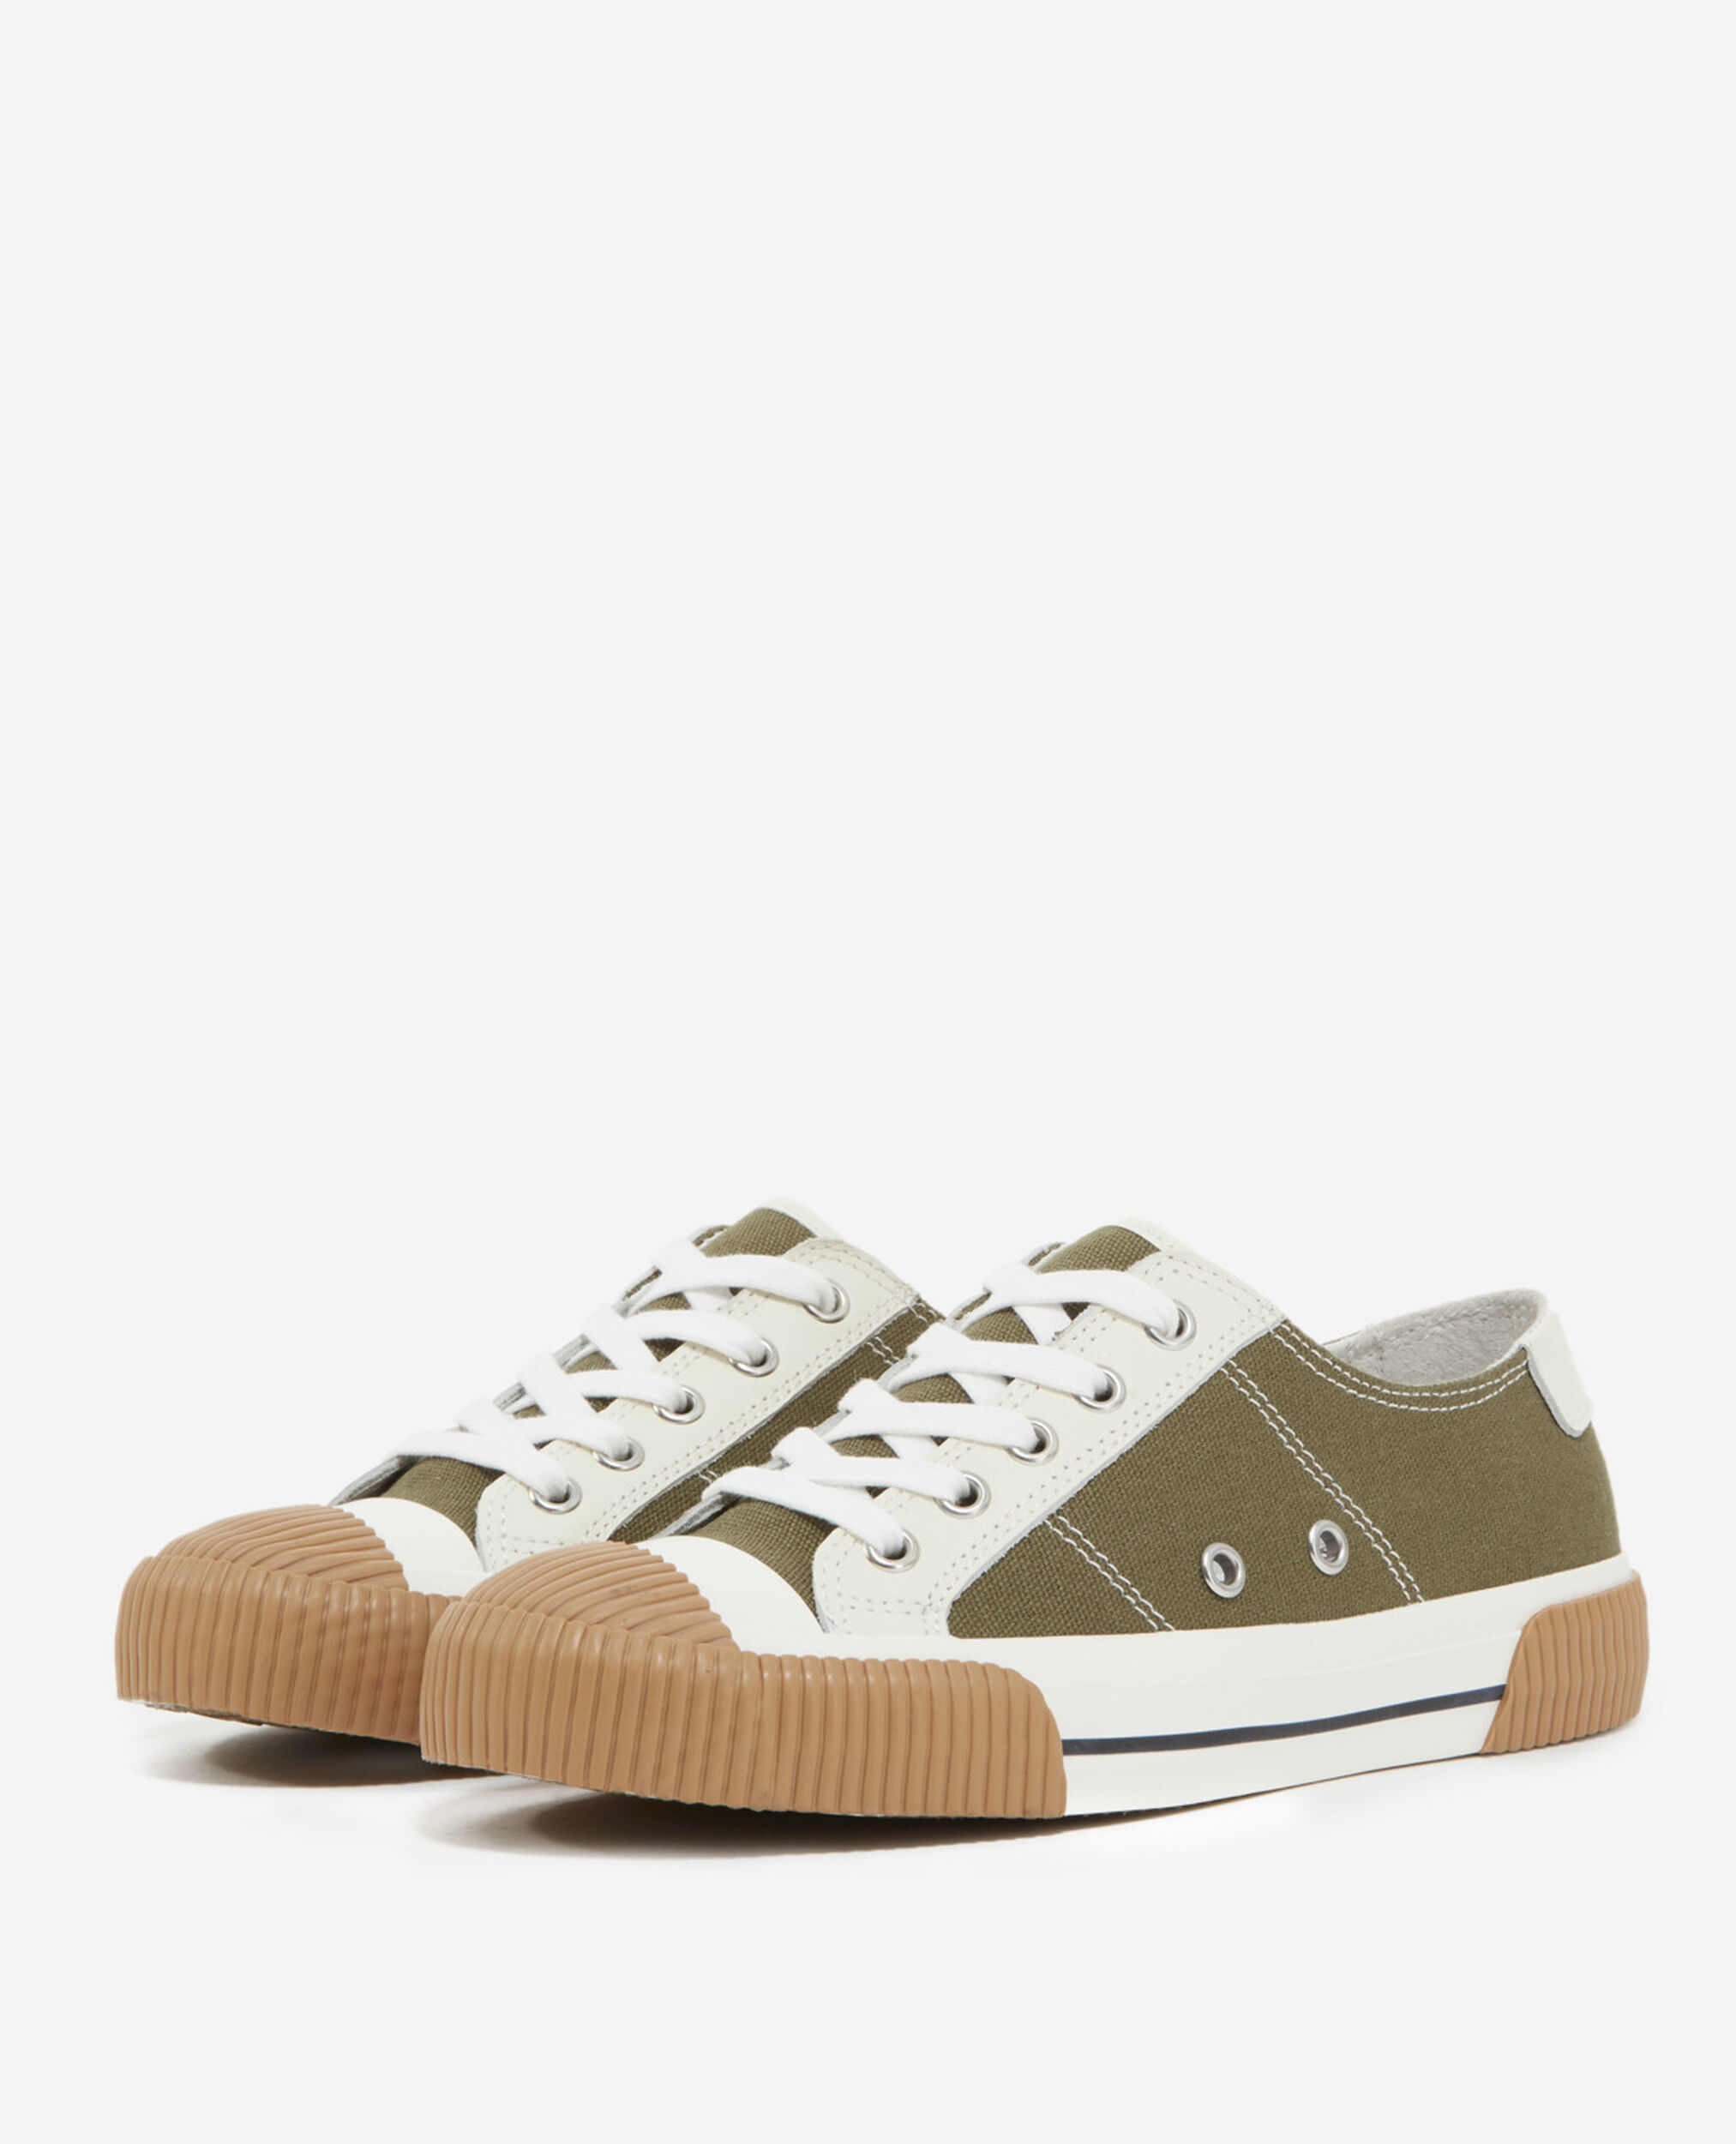 Khaki low-top canvas sneakers with details, KAKI, hi-res image number null